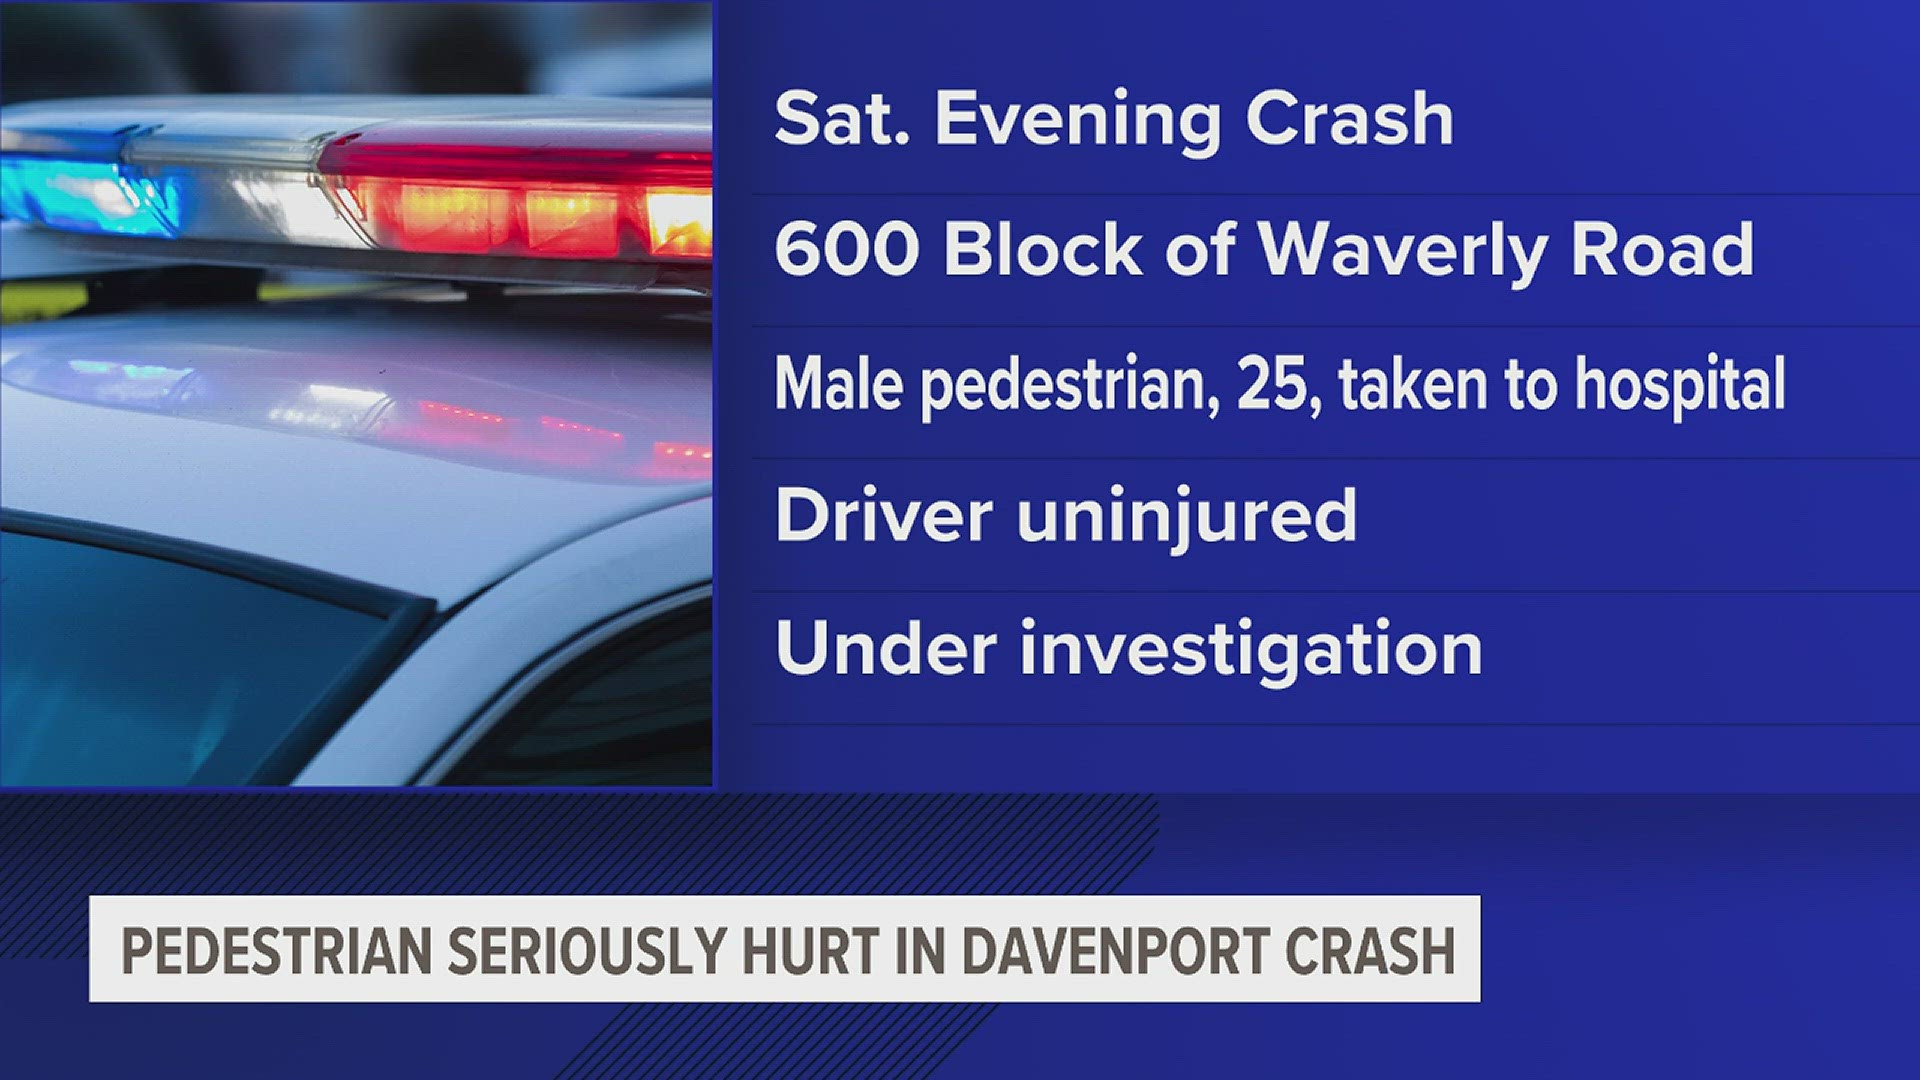 A 25-year-old man was struck by a vehicle as he walked on the shoulder of Waverly Road. He suffered life-threatening injuries in the crash.